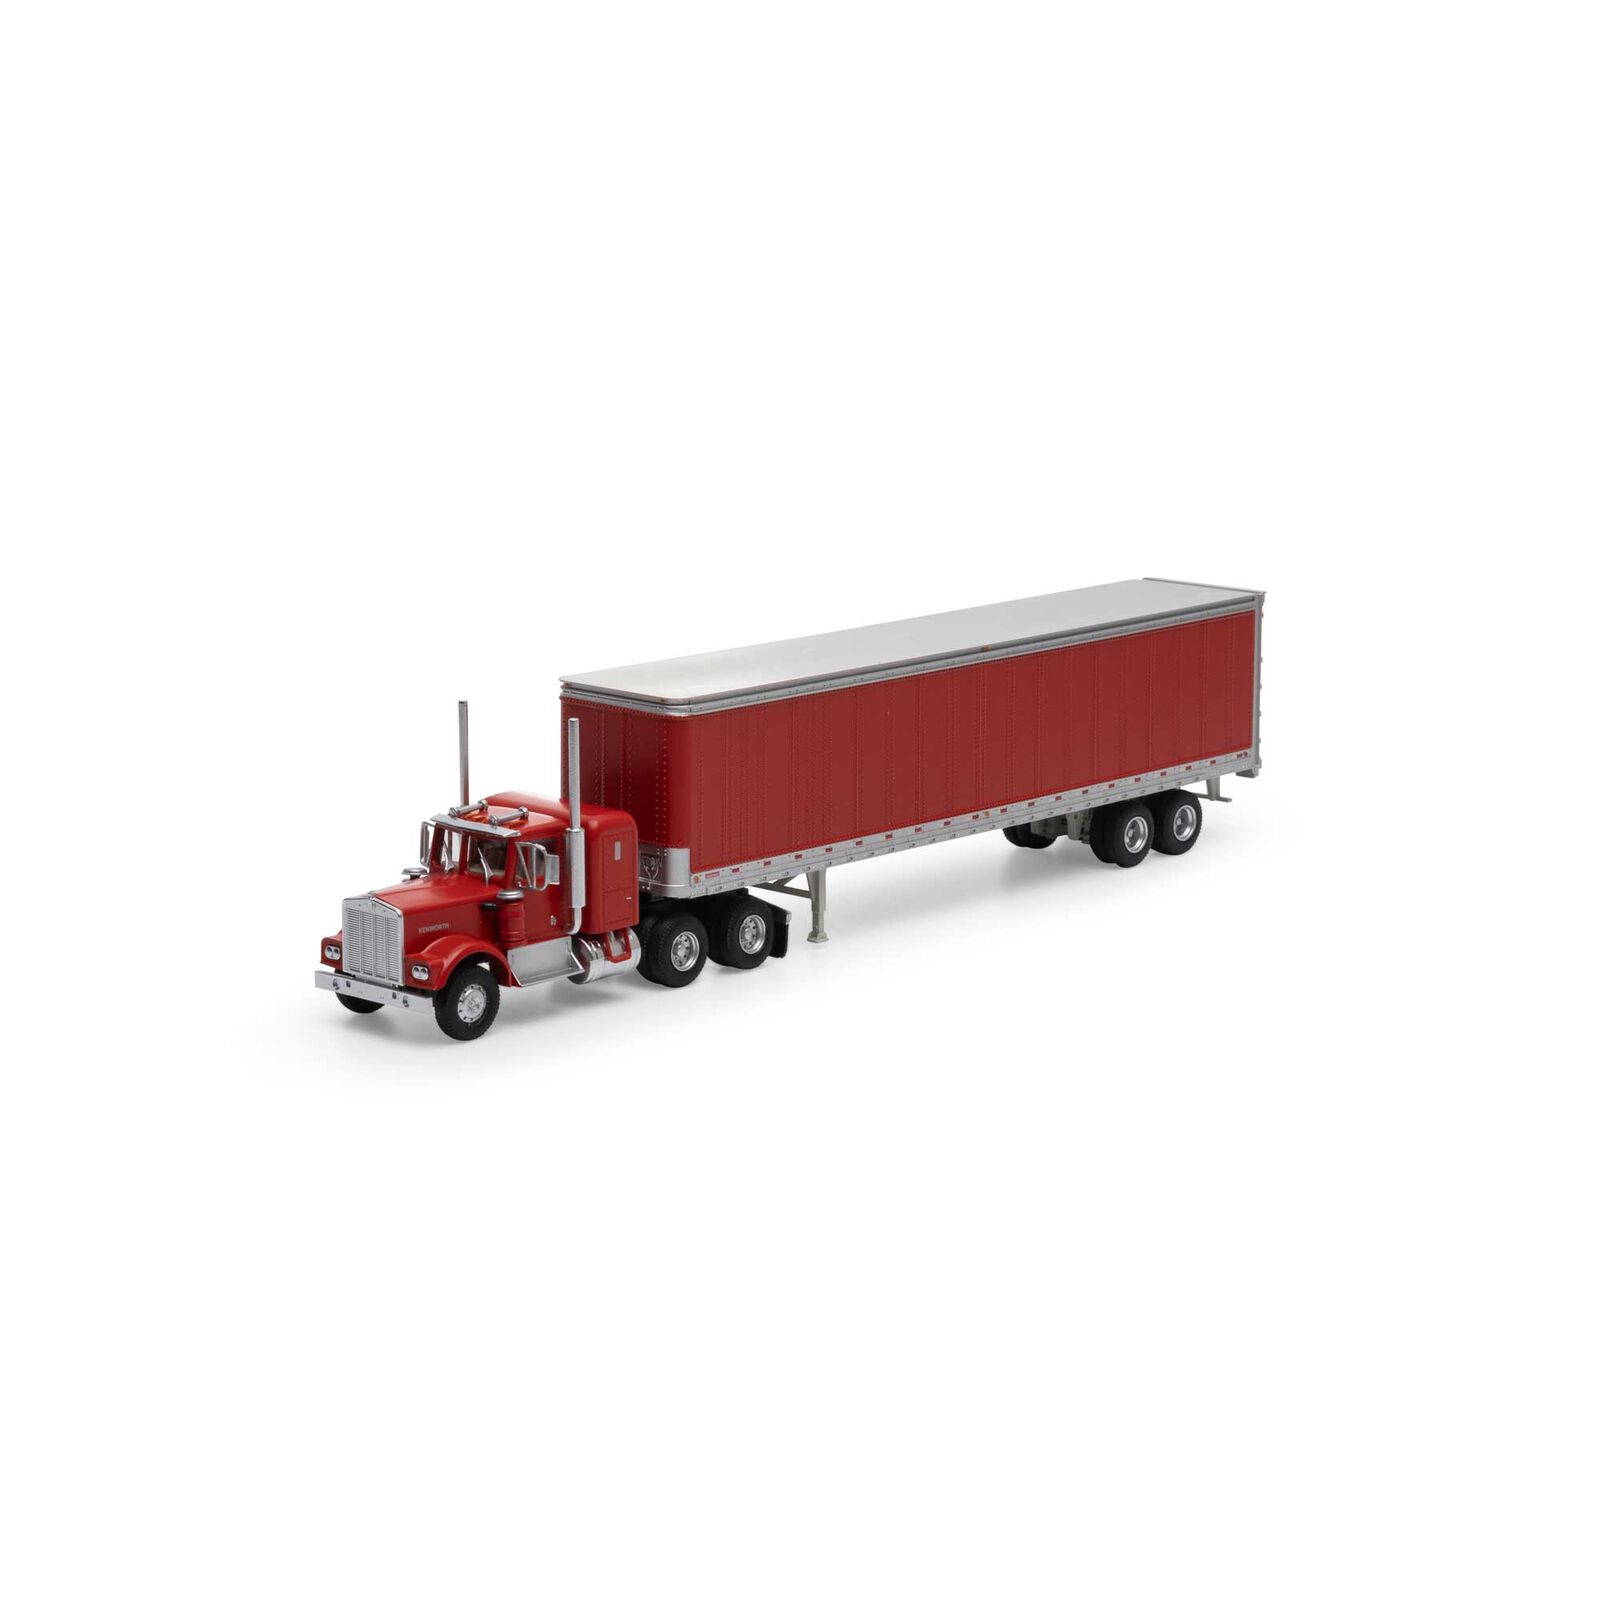 Athearn RTR 41089 - HO Kenworth Tractor & Trailer - Red